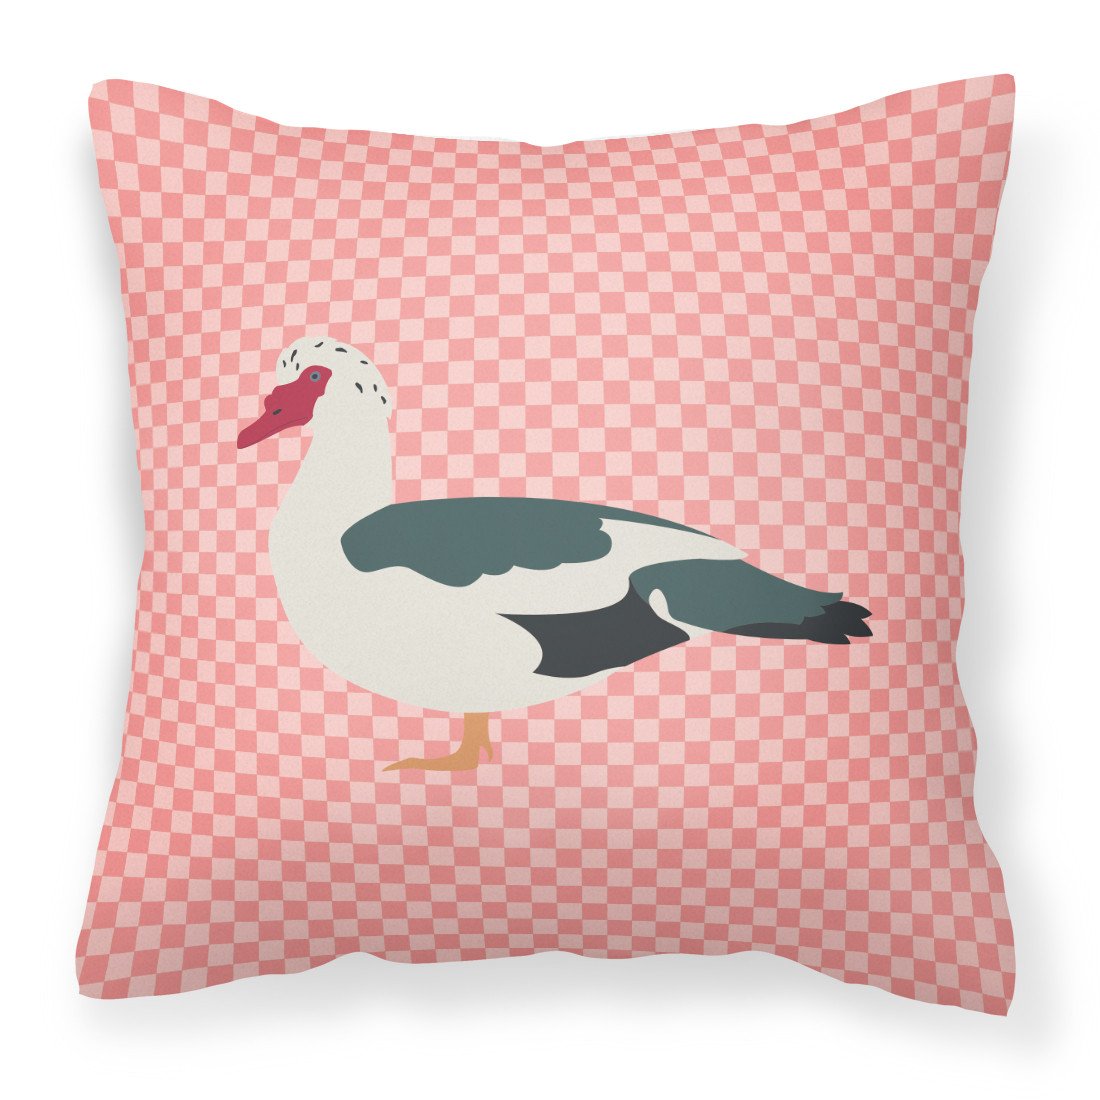 Muscovy Duck Pink Check Fabric Decorative Pillow BB7864PW1818 by Caroline's Treasures